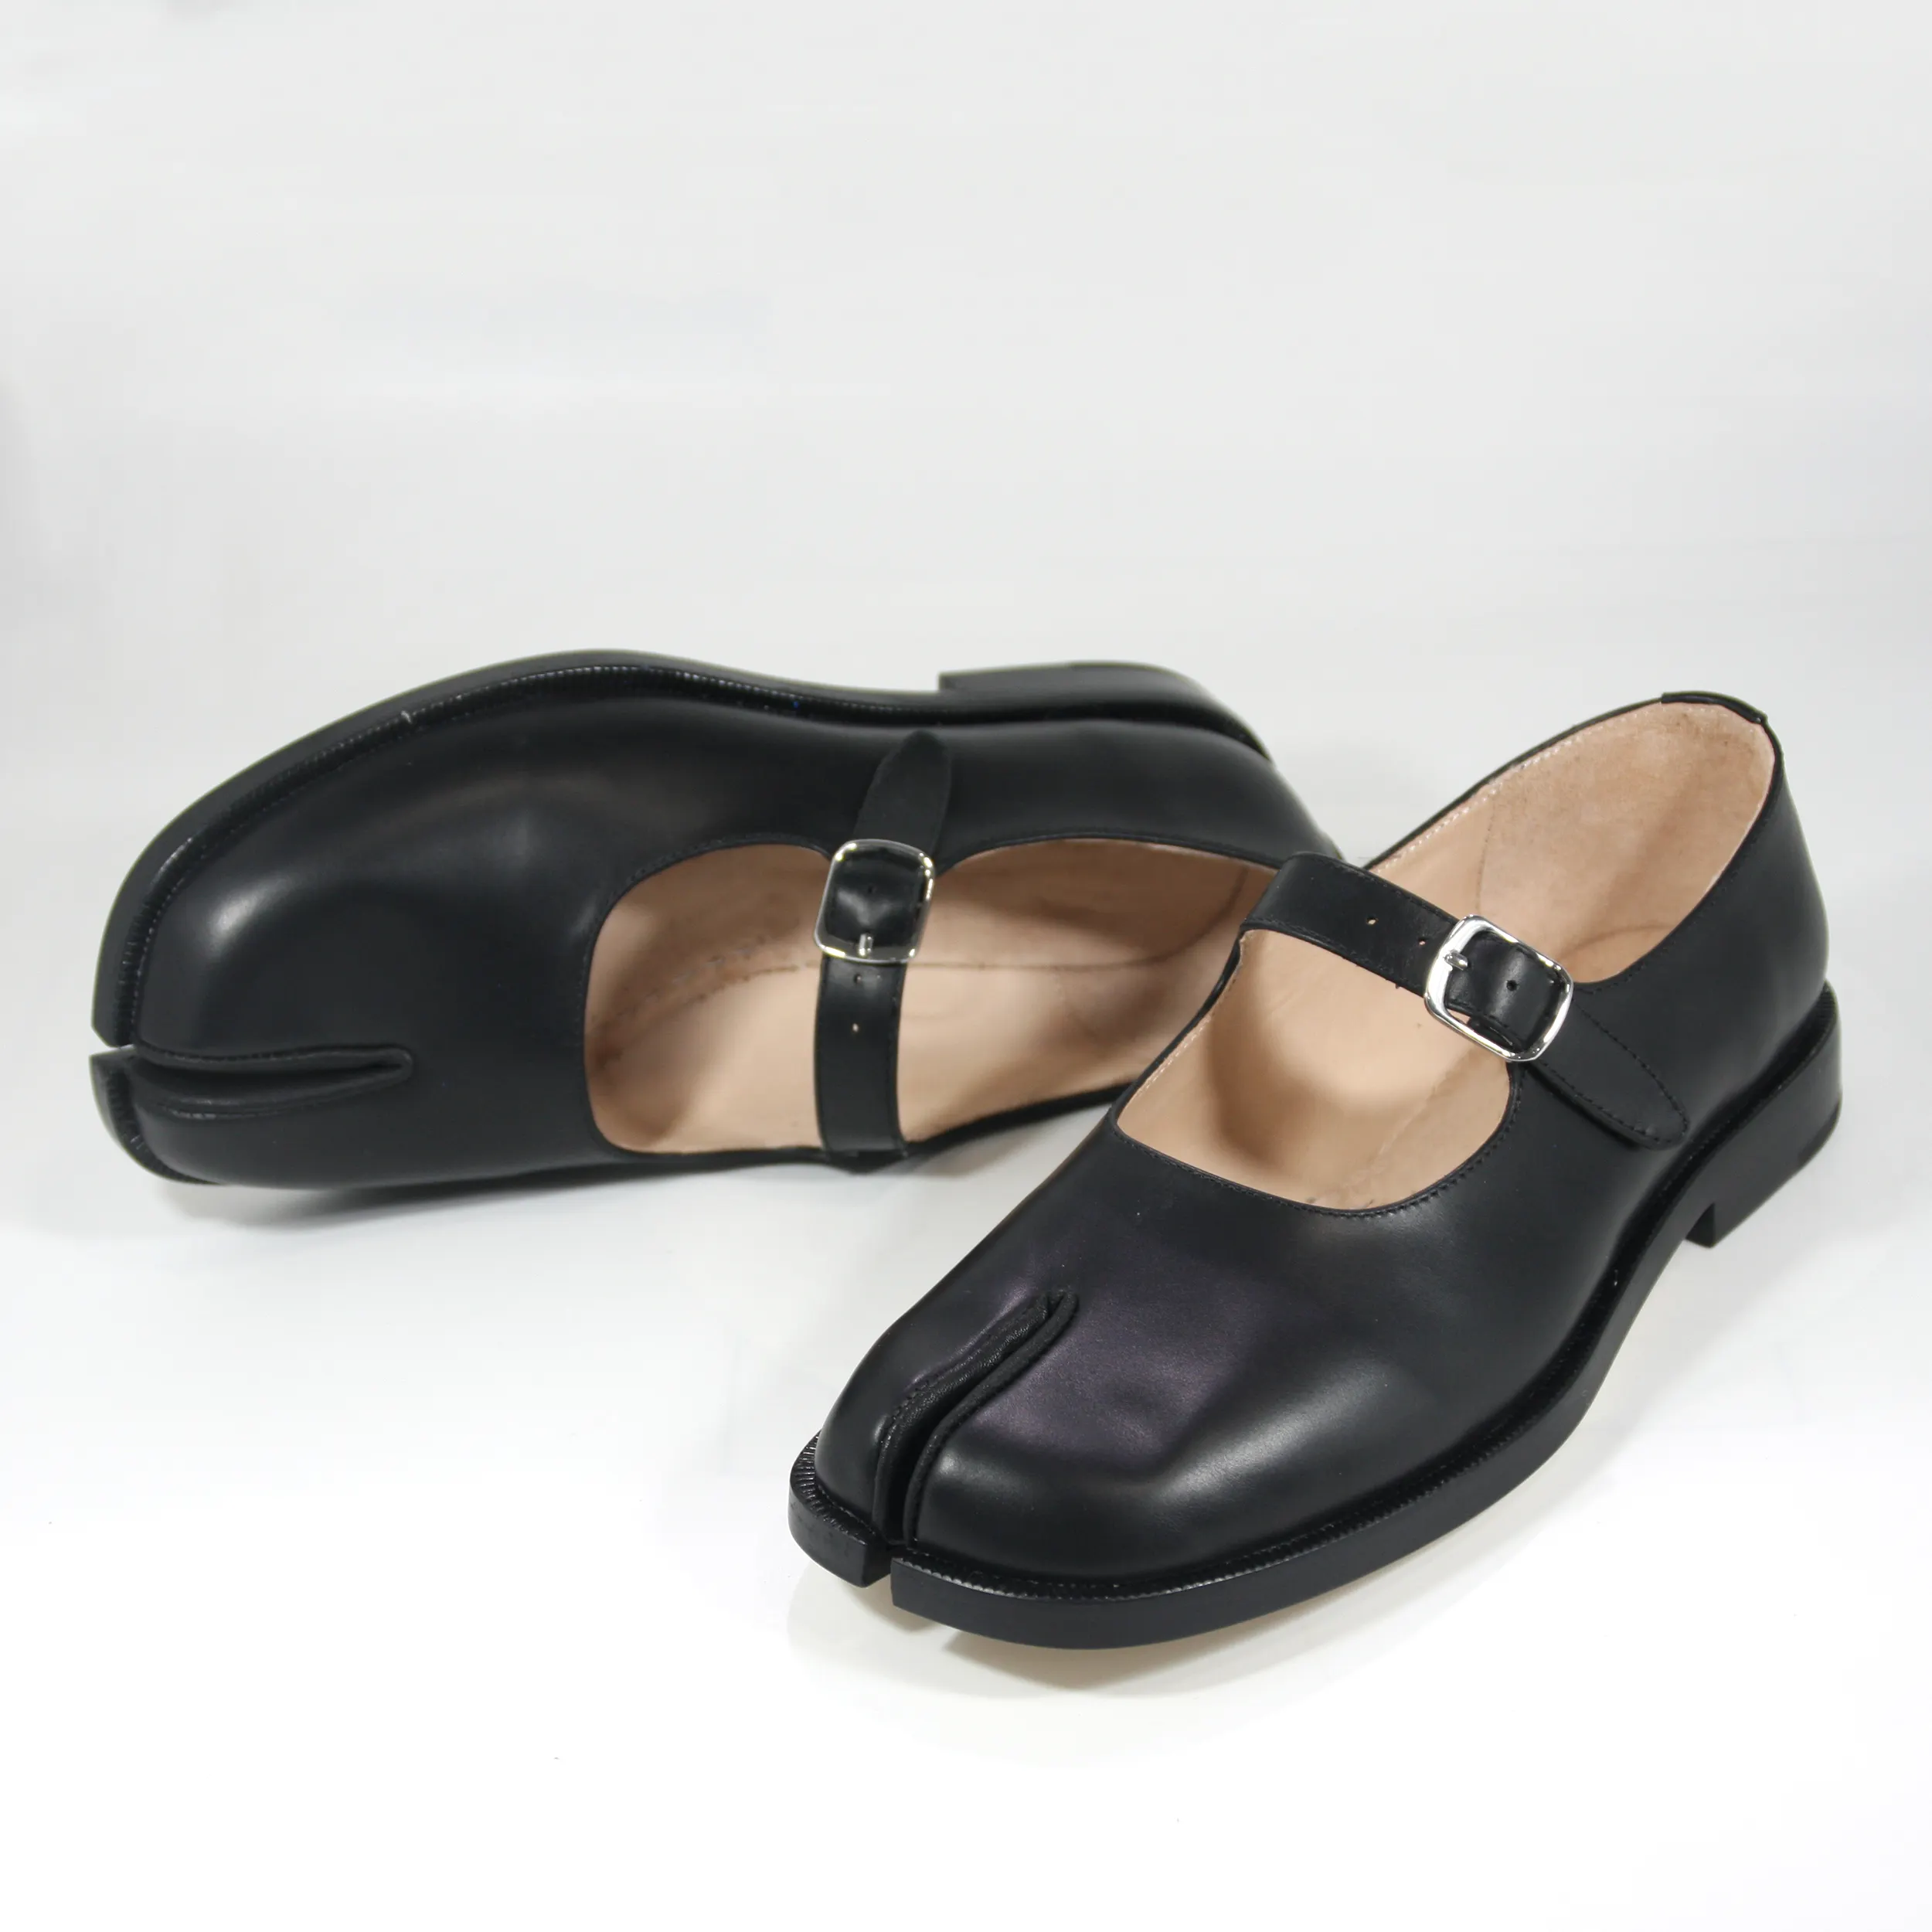 Stylish flat hills shoe for women casual leather buckle strap mary jane design Split toe ladies pumps flat shoes